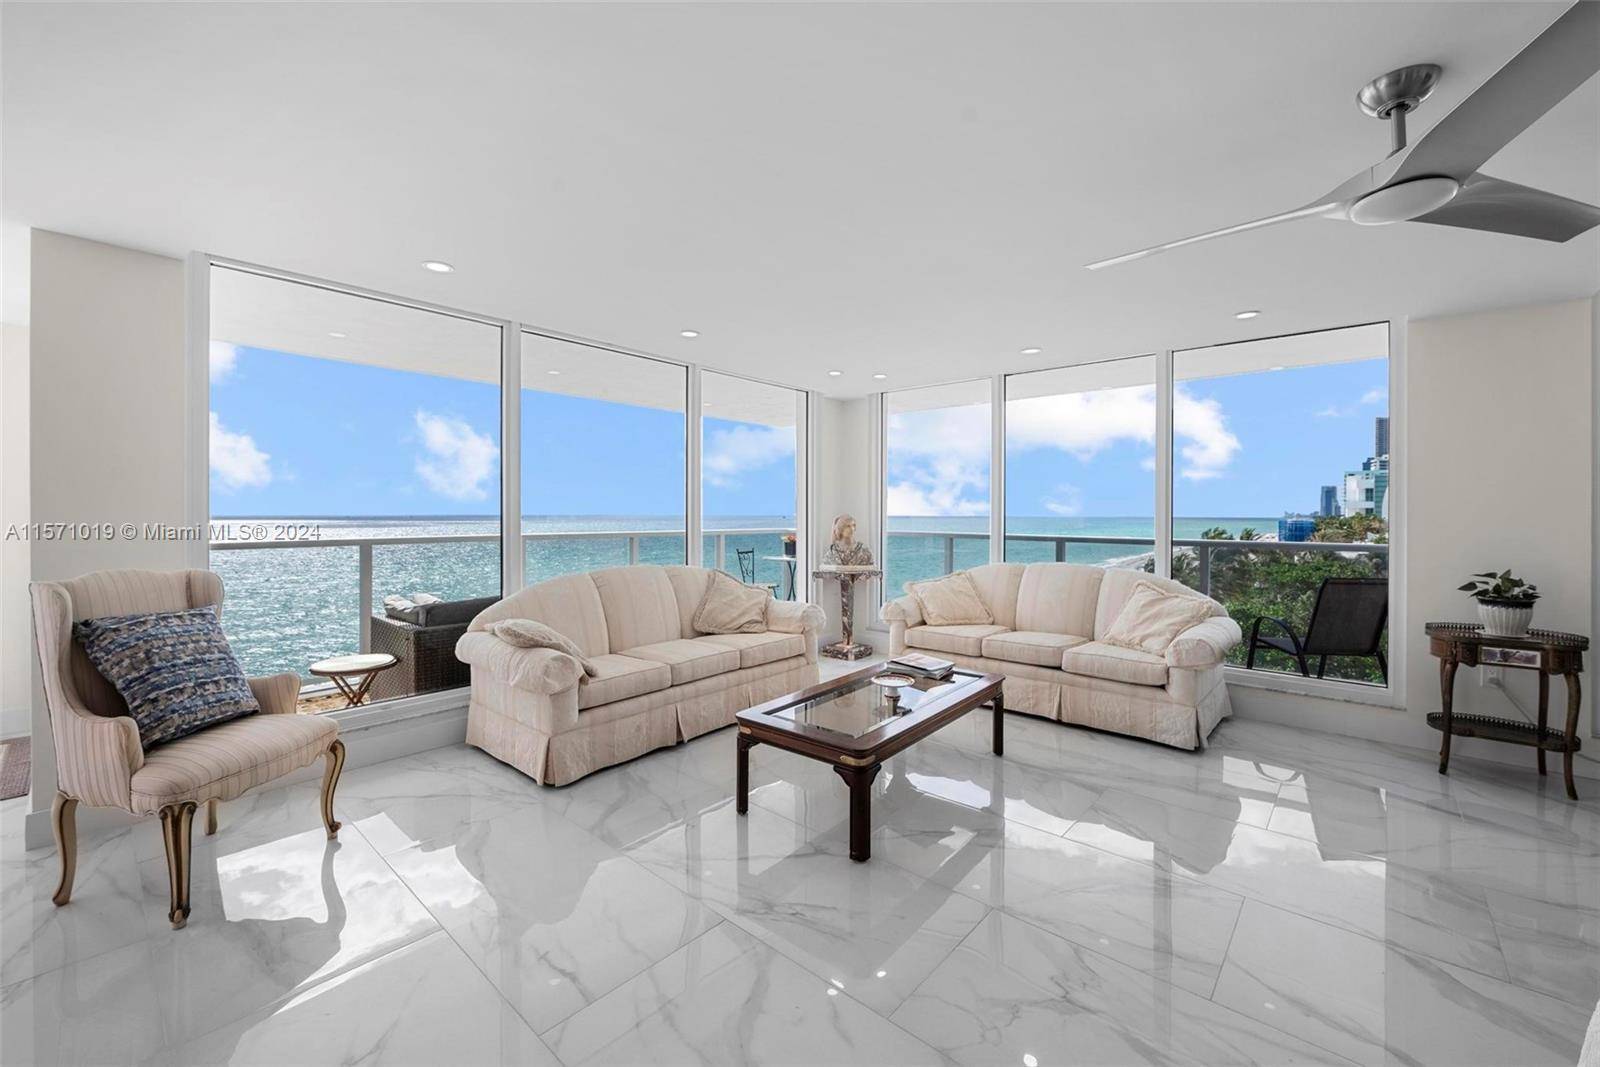 Experience luxury coastal living in this stunning 2 bedroom, 2.